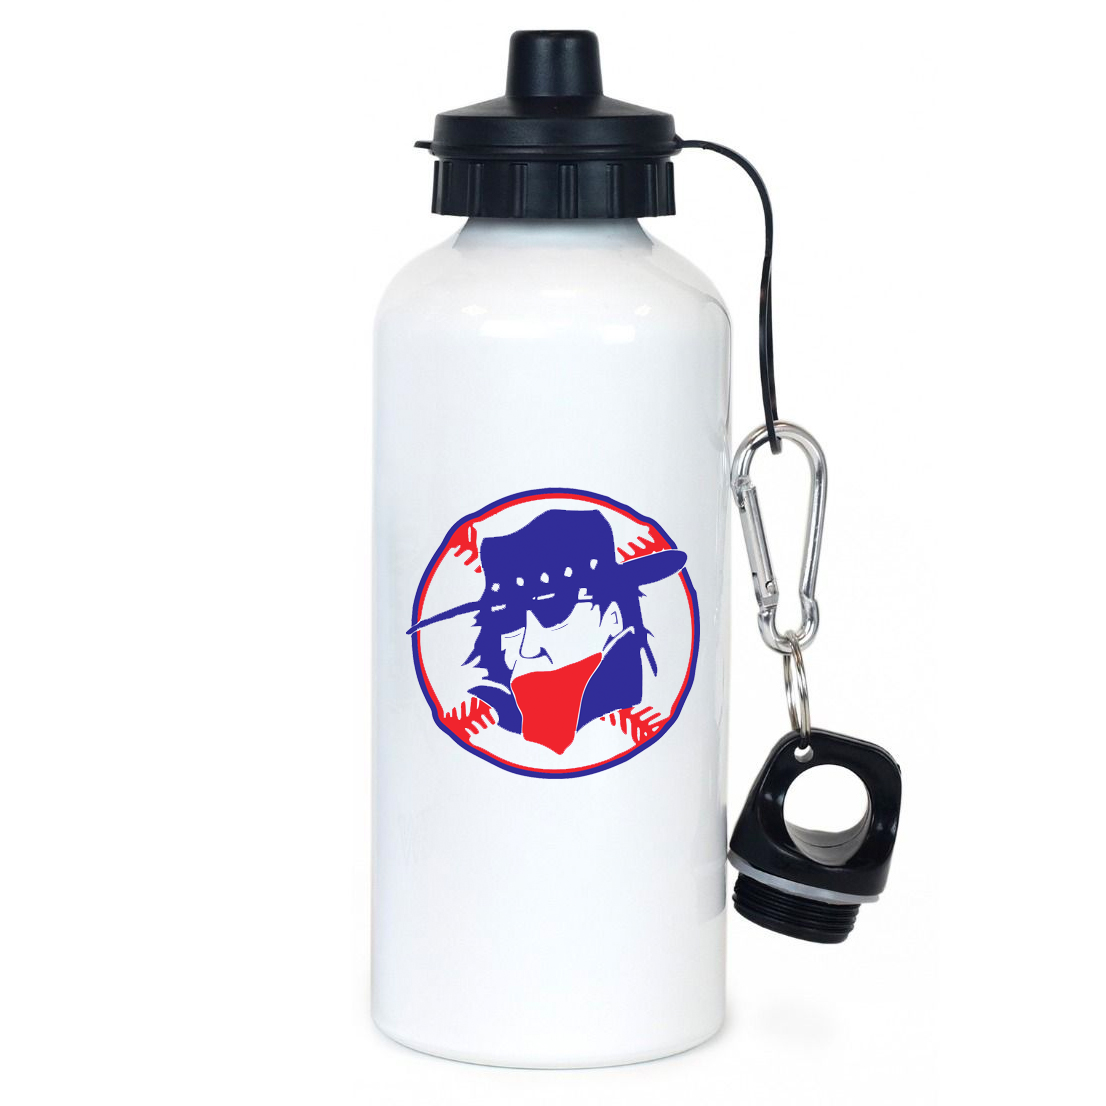 Southern Indiana Outlaws Baseball Team Water Bottle